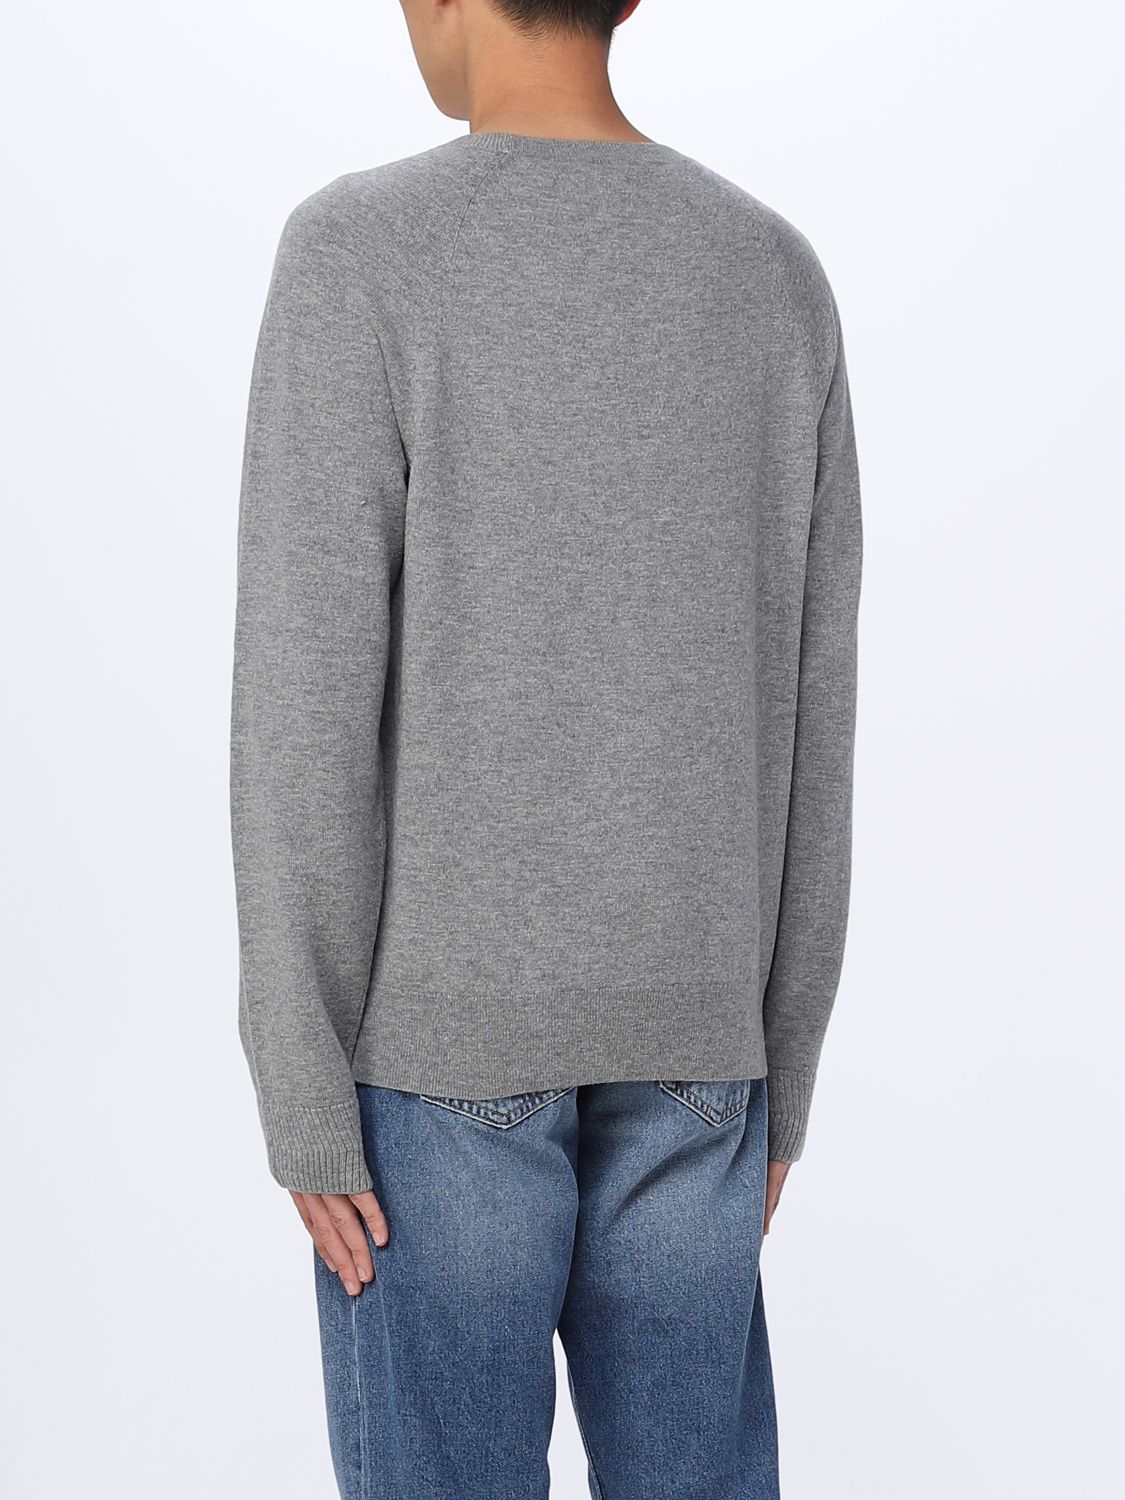 A.P.C.: sweater for man - Grey | A.p.c. sweater WVBBYH23225 online on ...